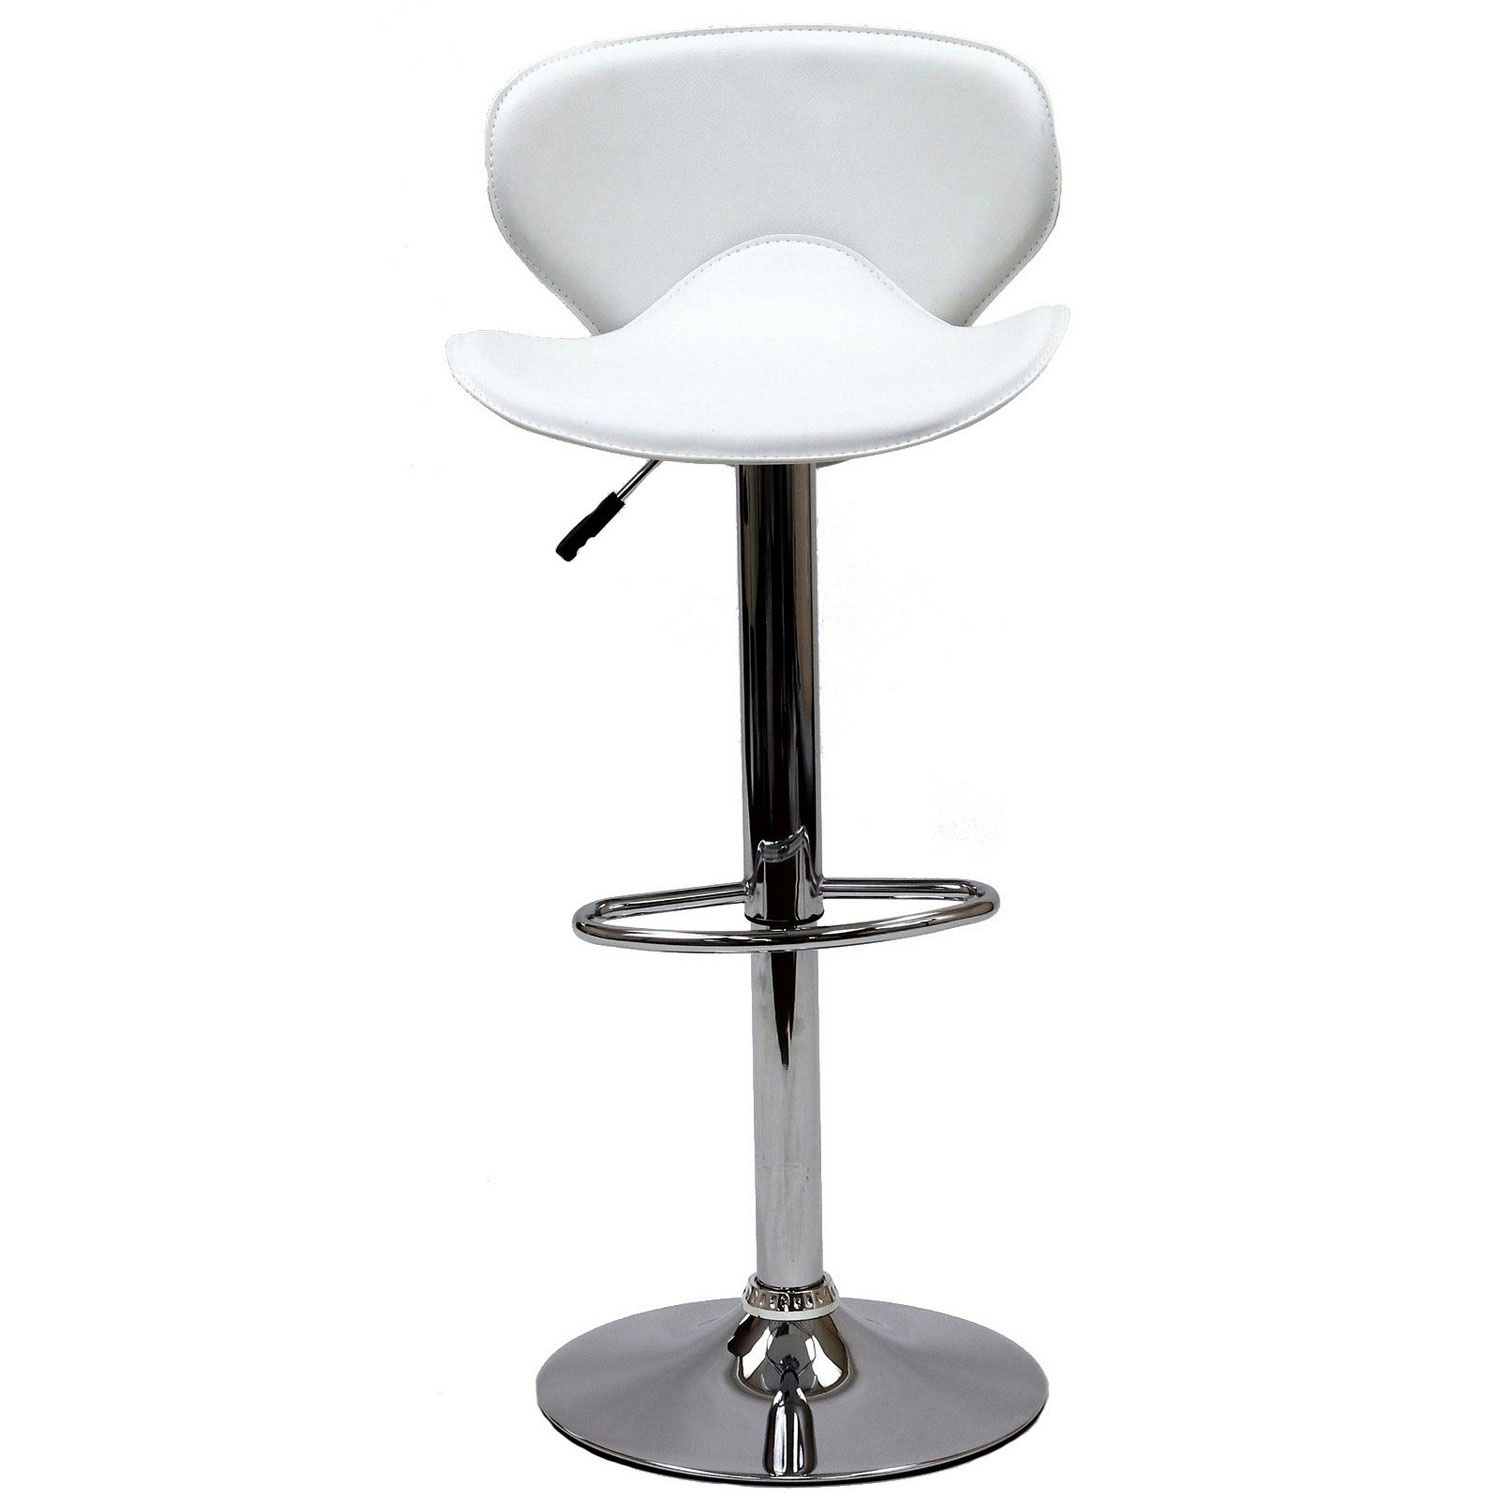 Modway Booster Bar Stool - White